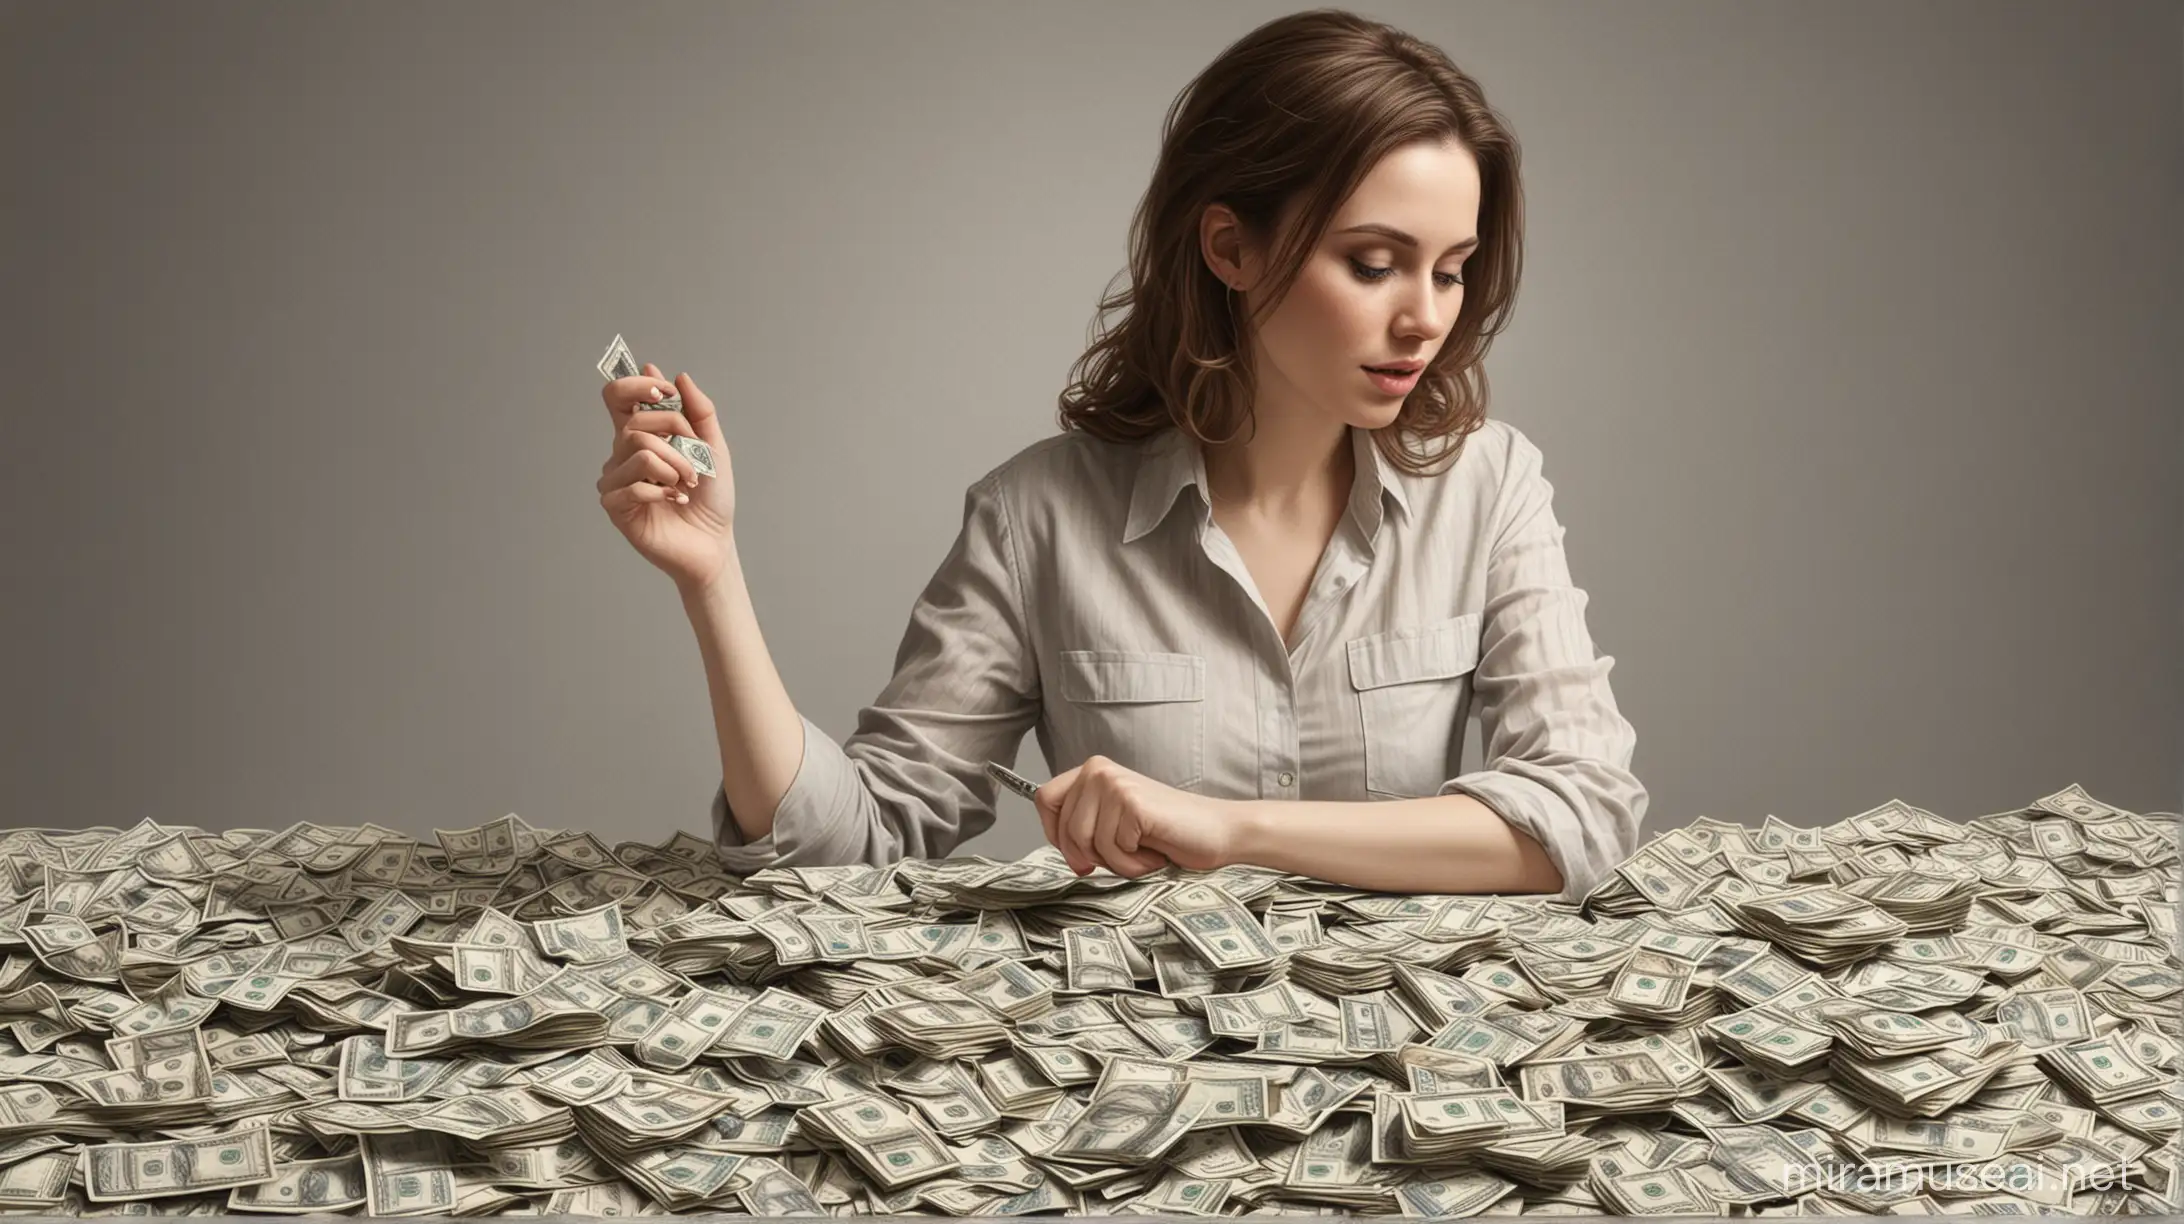 Wealthy Woman Counting Piles of Cash